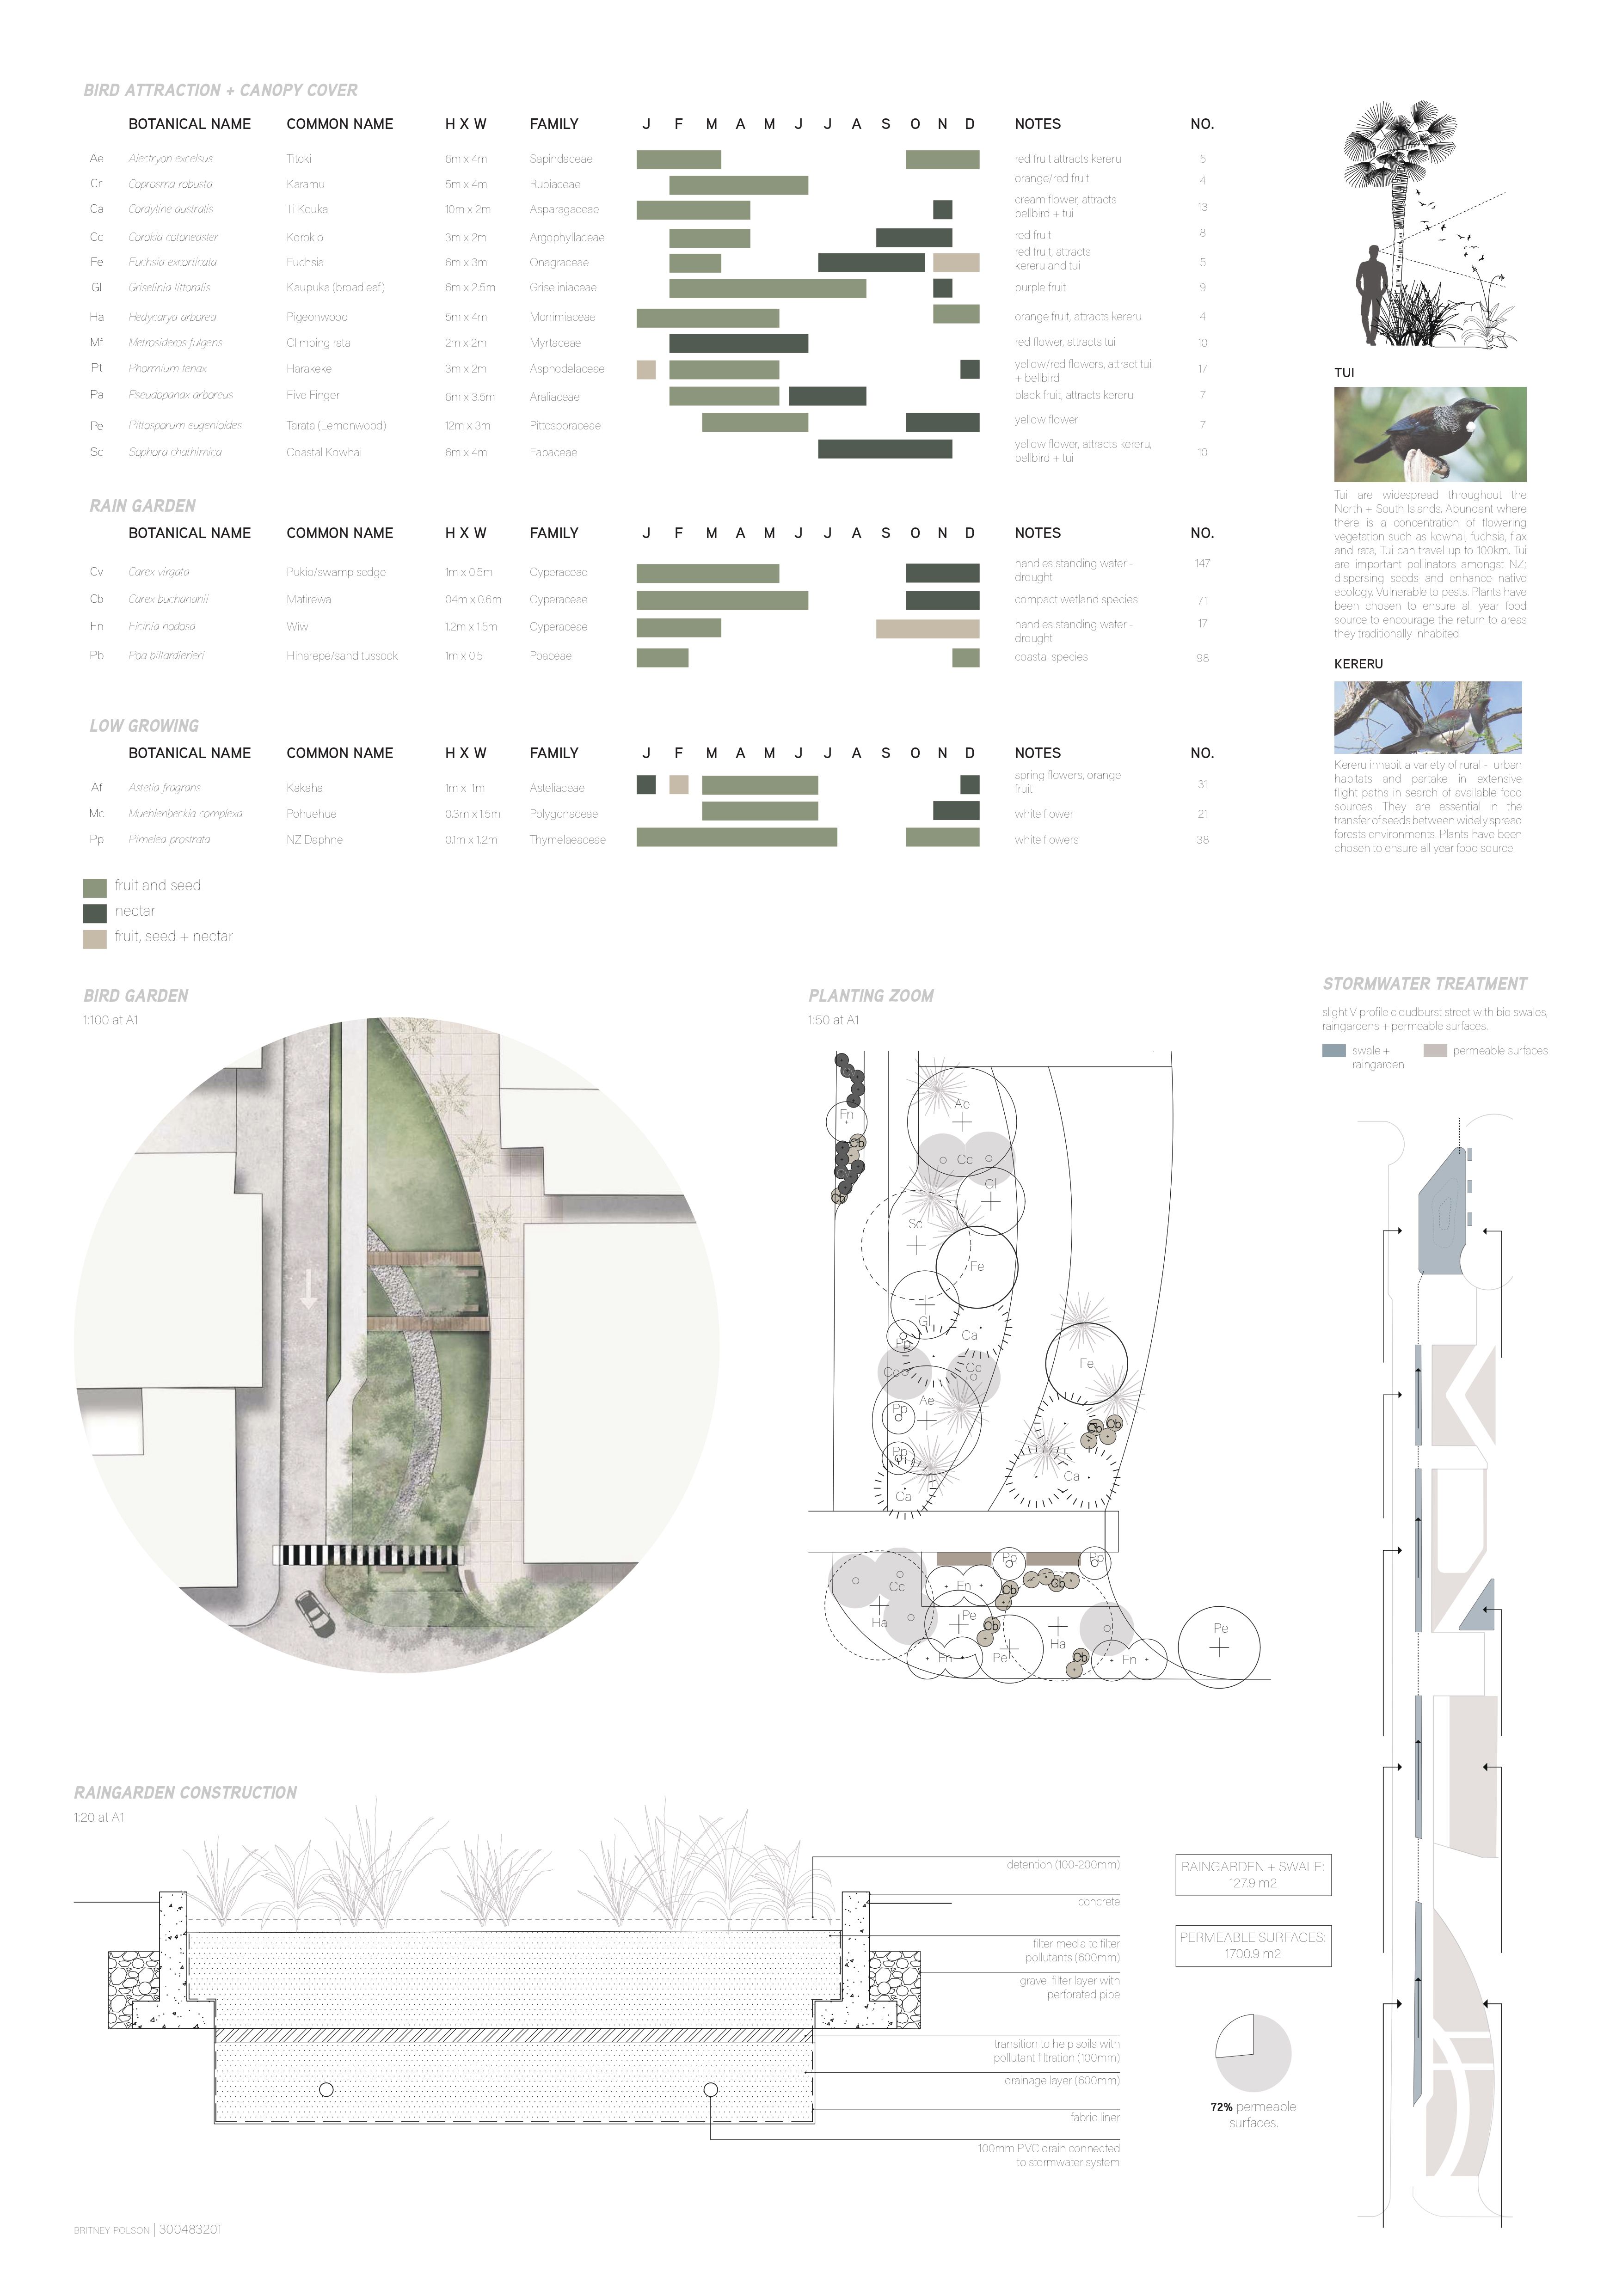 Sketches of landscape architecture project - image 2